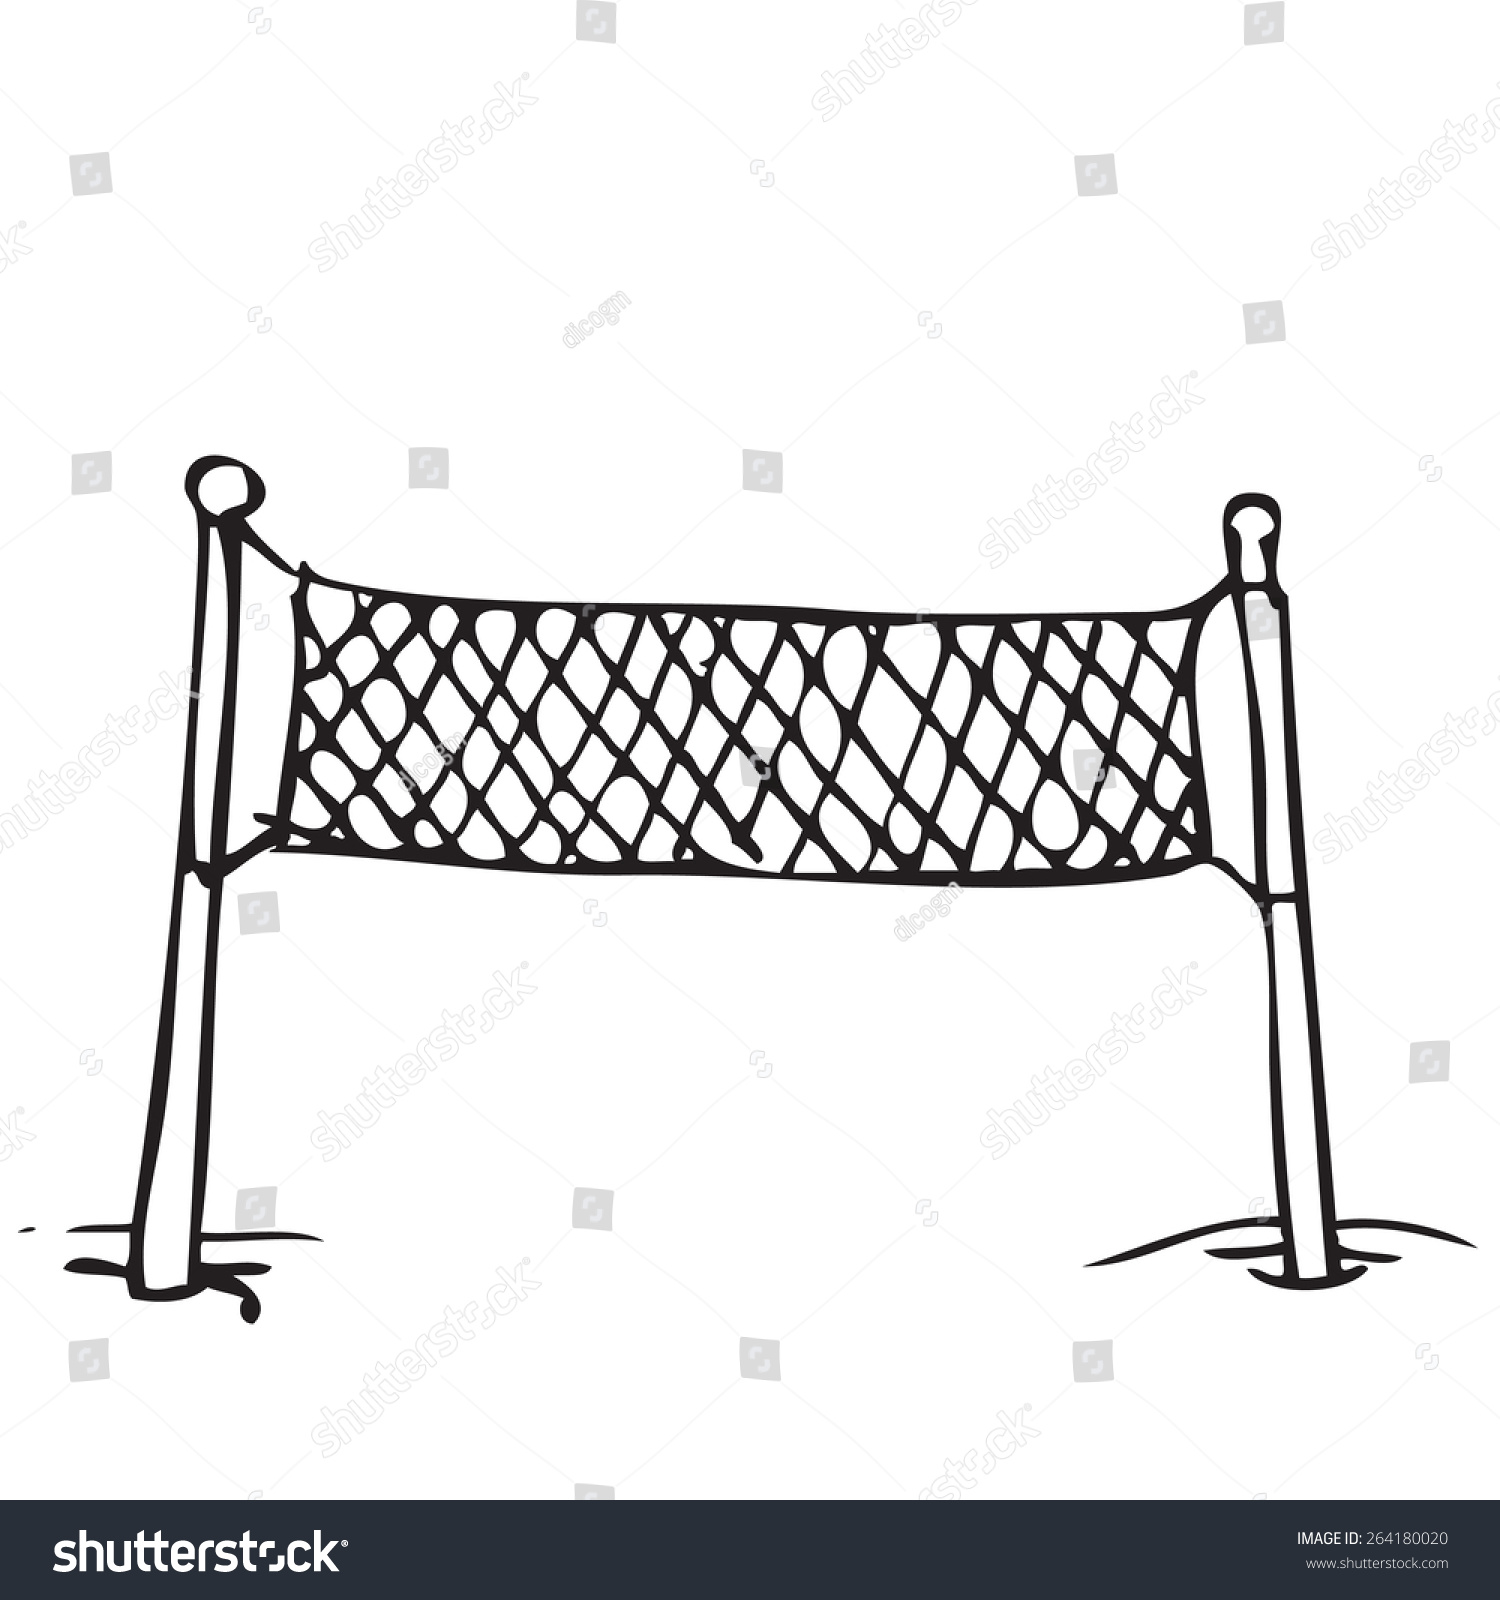 clipart volleyball net - photo #26